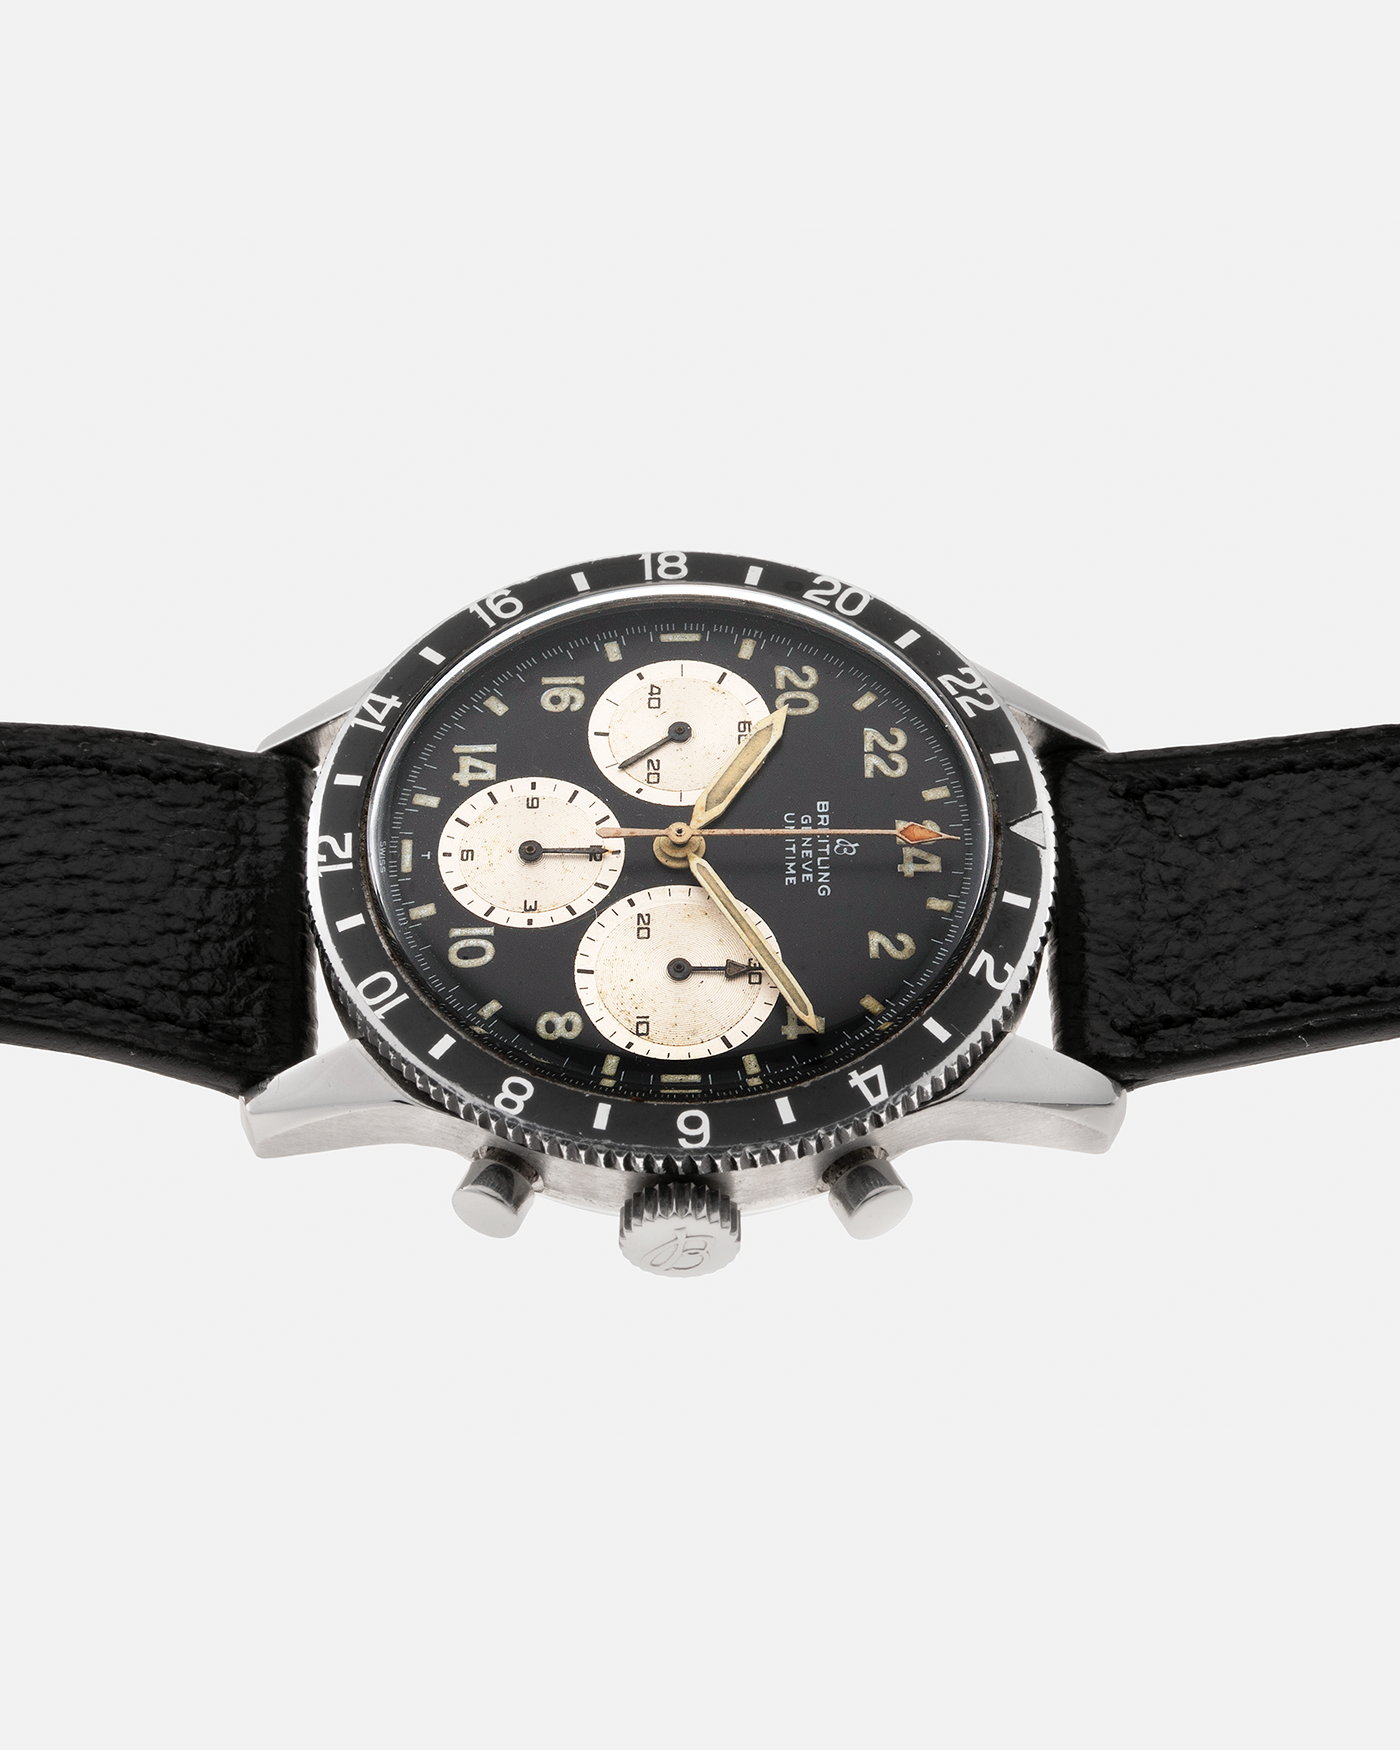 Brand: Breitling Year: Late 1960s Model: Unitime Reference Number: 1765 Material: Stainless Steel Movement: Venus Cal. 178, Manual-Winding Case Diameter: 41mm Strap: Generic Black Textured Calf Leather Strap